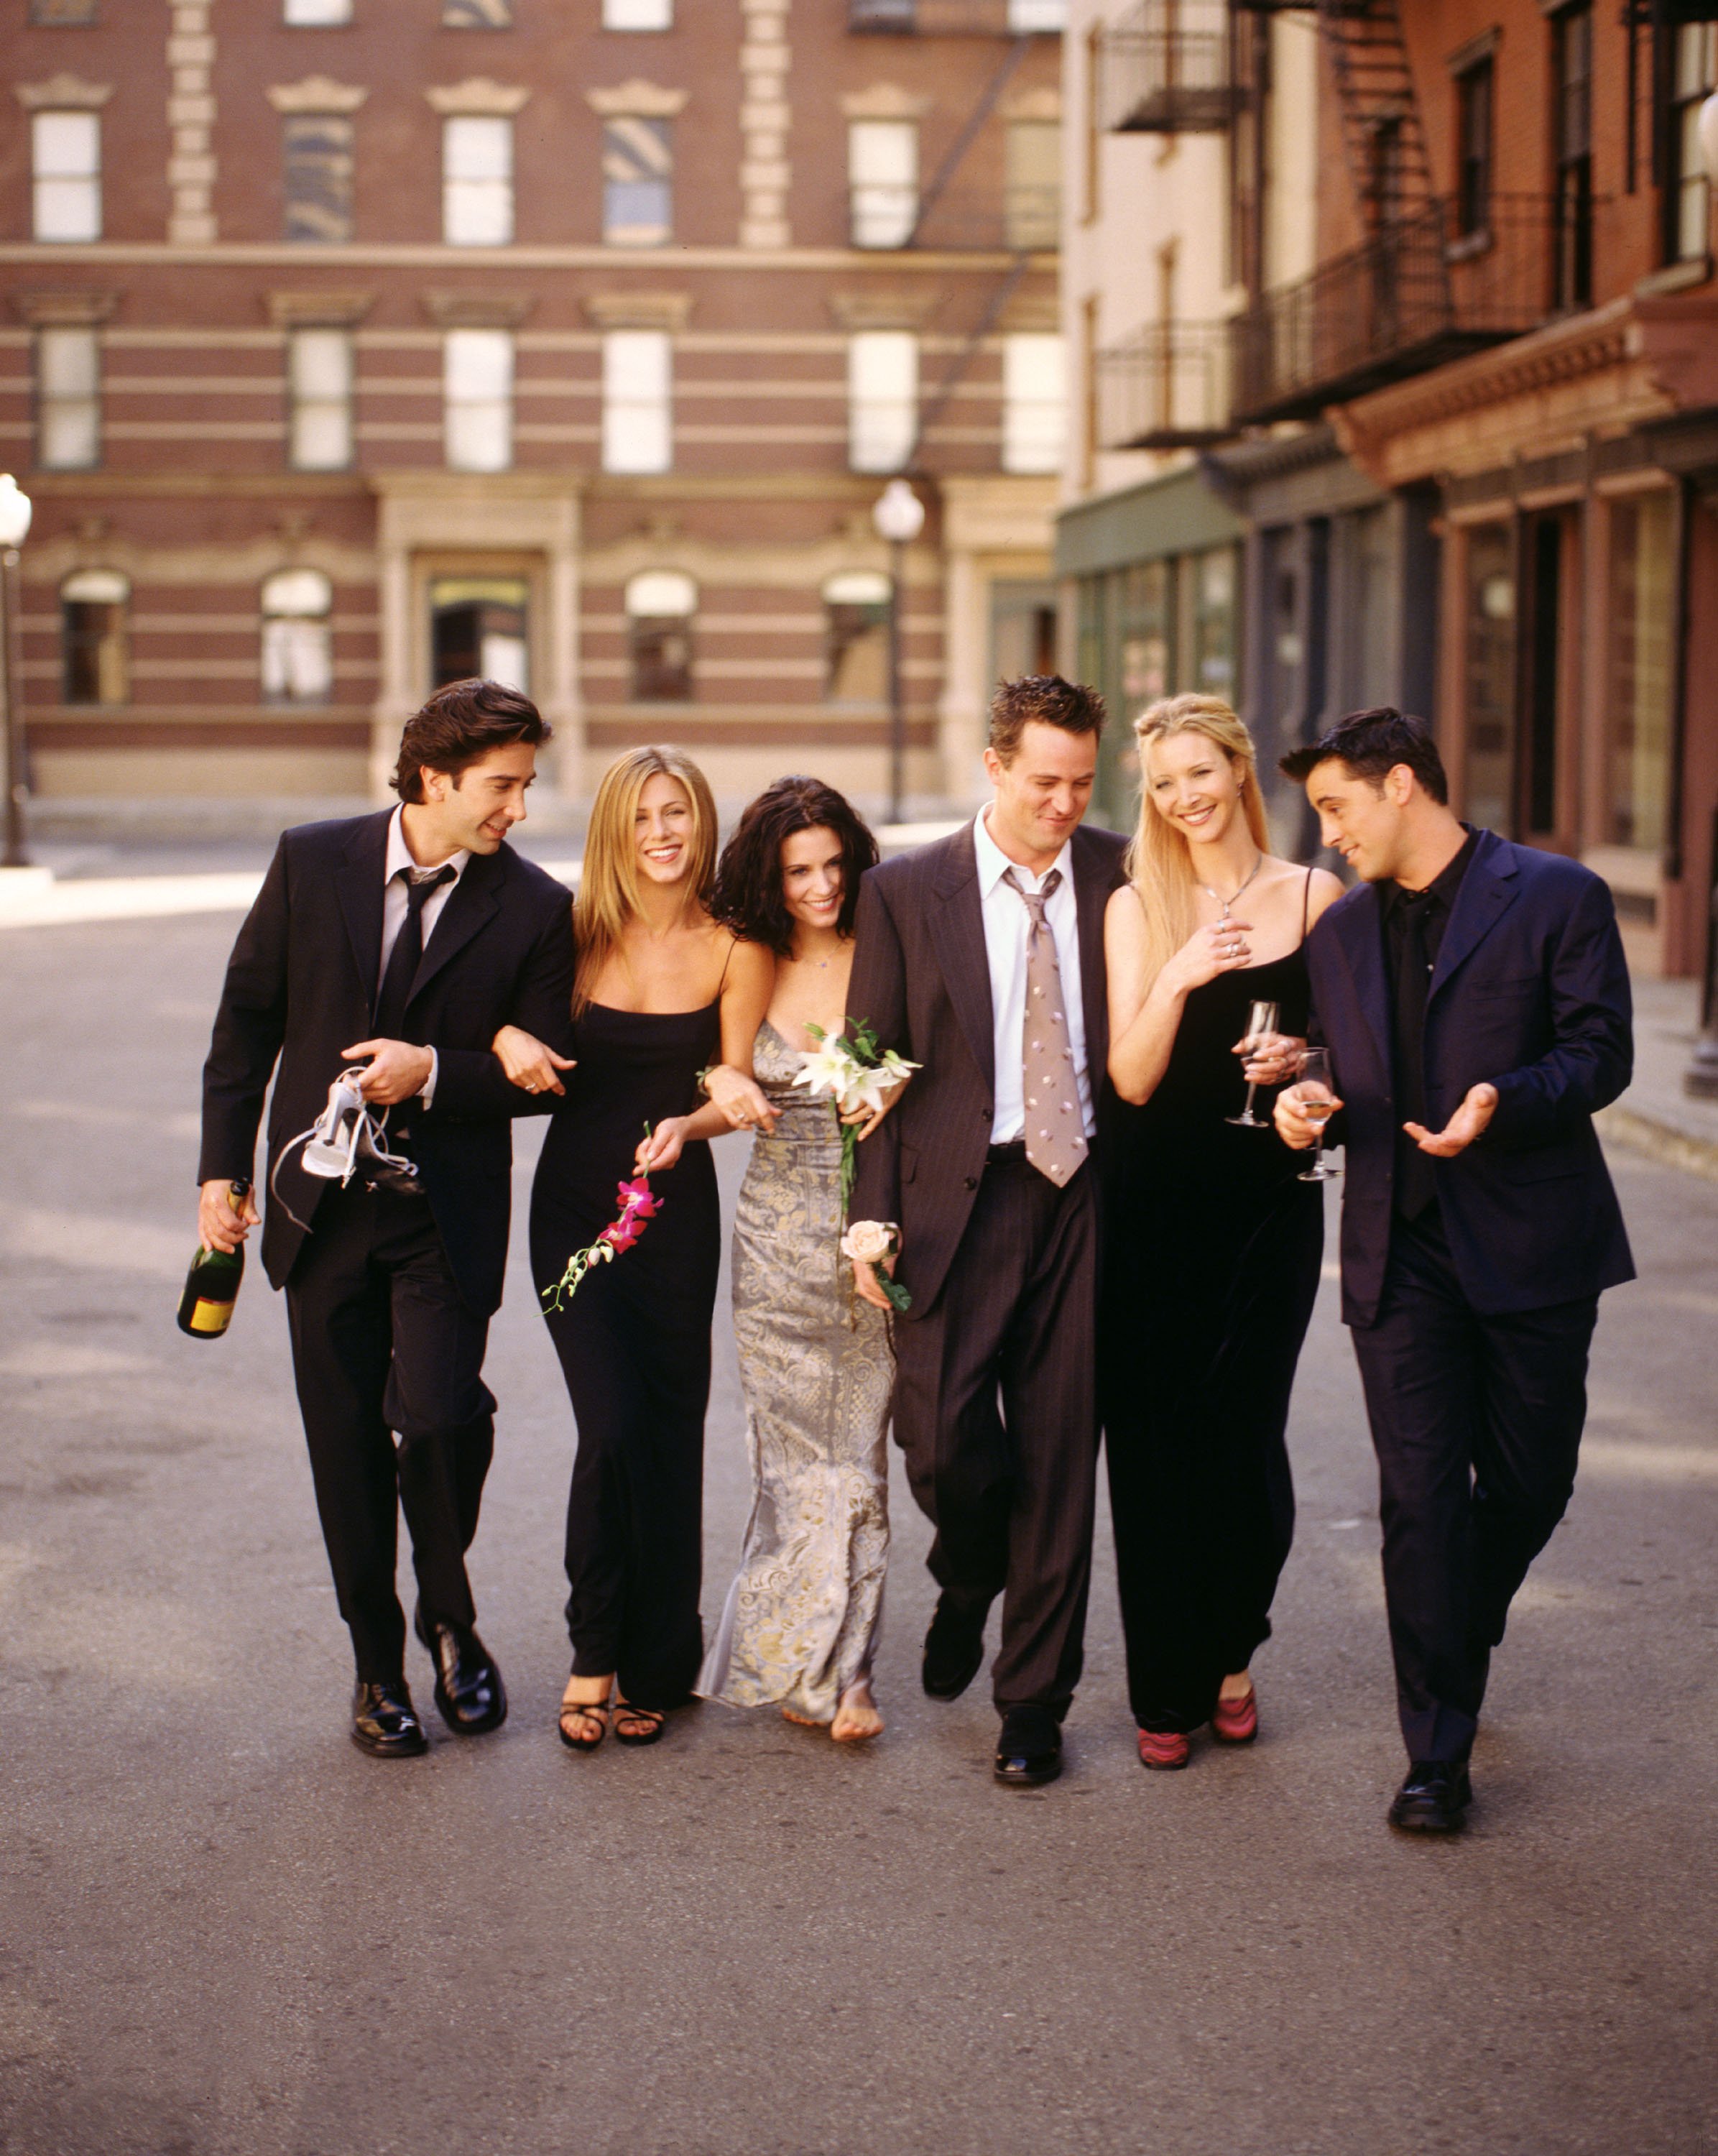 One of the stills of the 1994 "Friends" TV series. | Getty Images